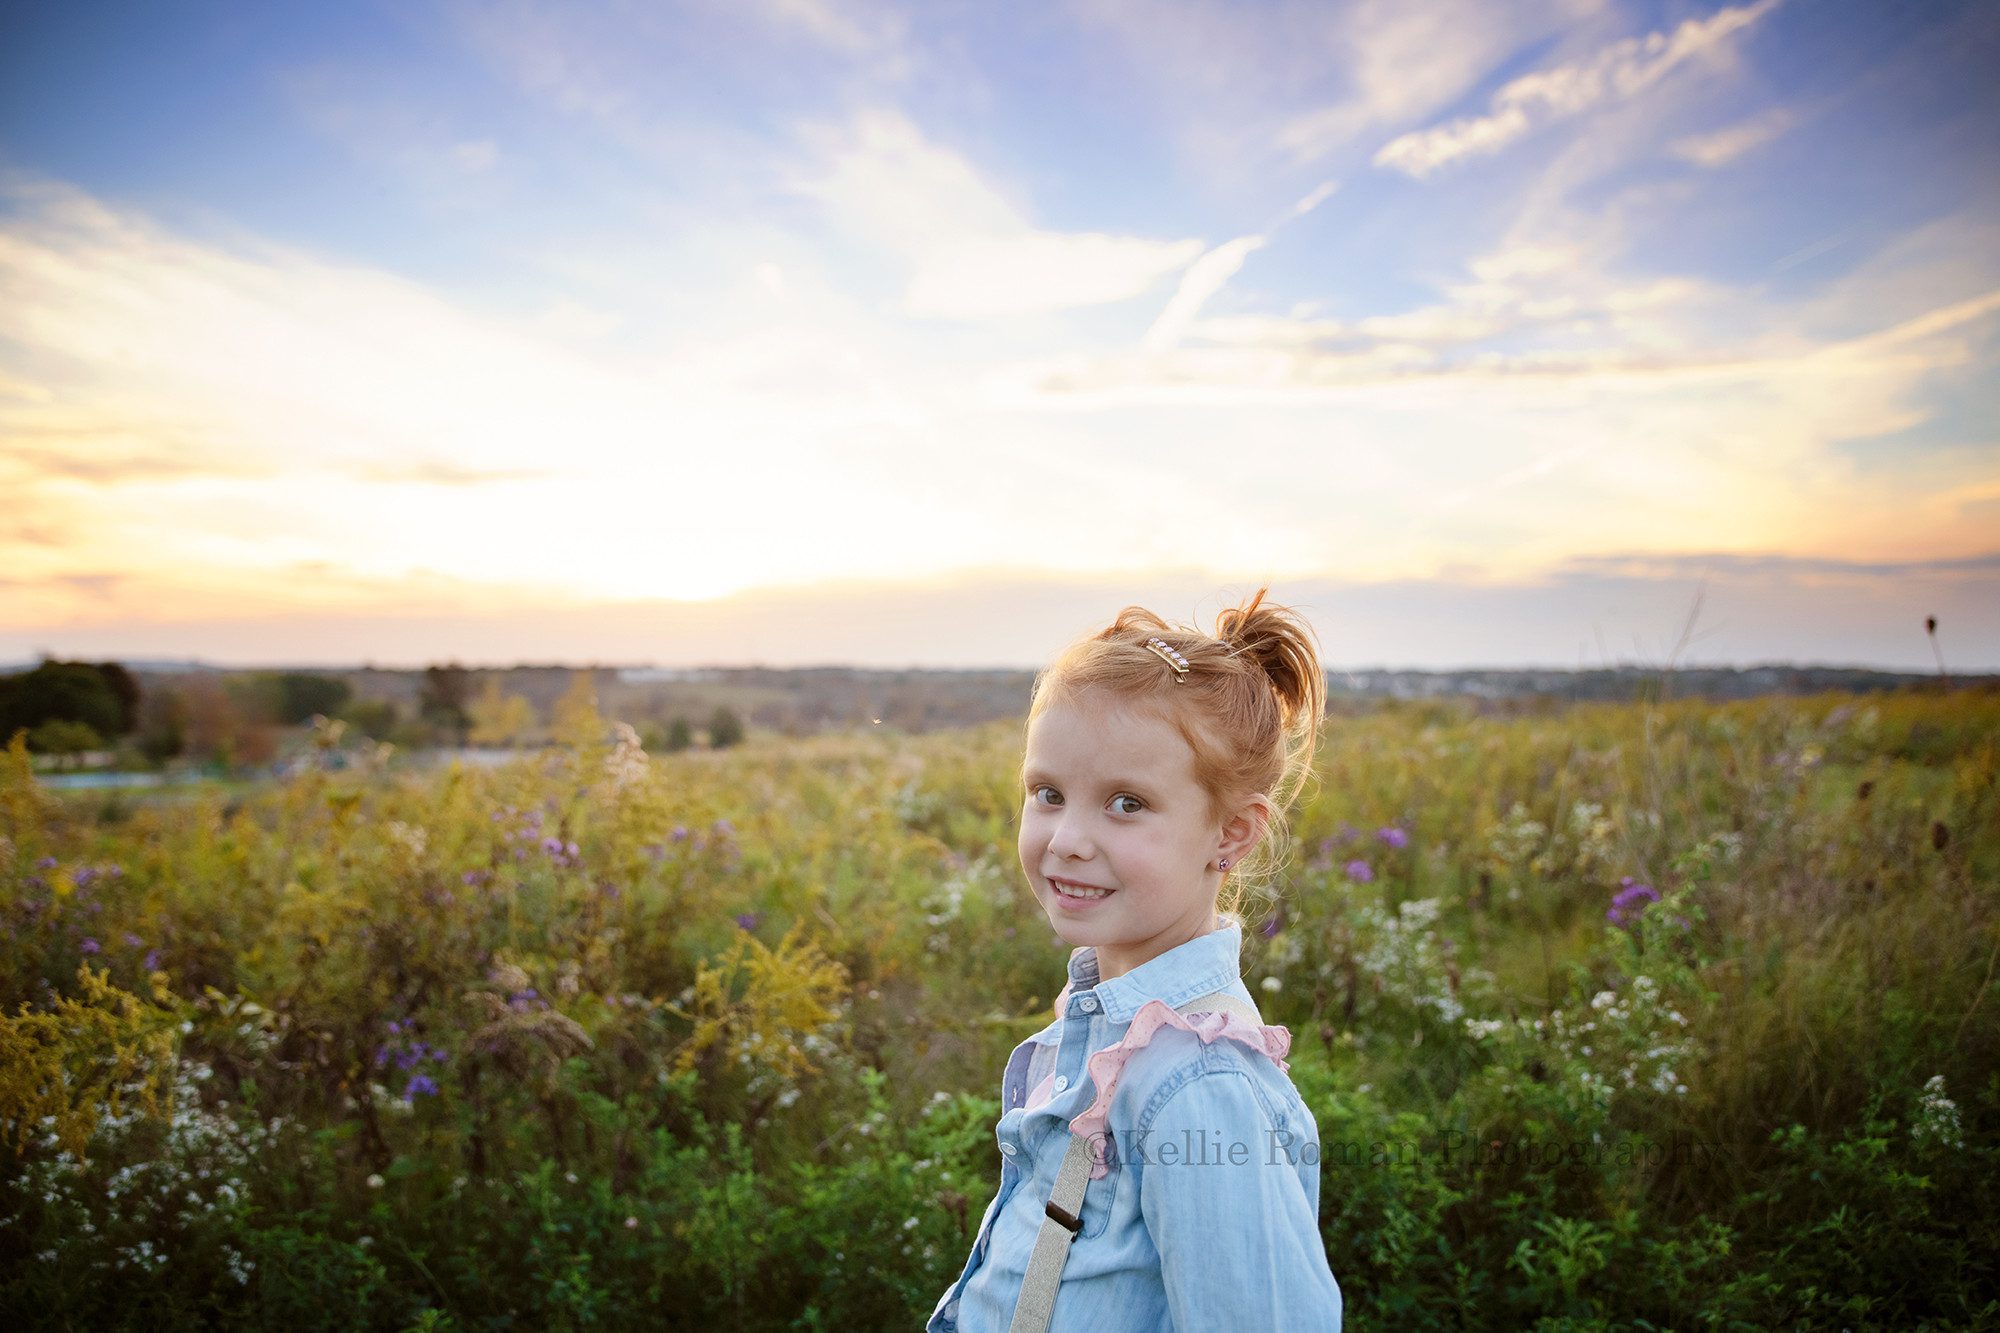 sunset milestone a young girl with red hair is standing in a field of tall grass in milwaukee Wisconsin park she is looking into the camera and smiling the sun is setting behind her on the horizon she has a denim blue shirt with pink and gold suspenders